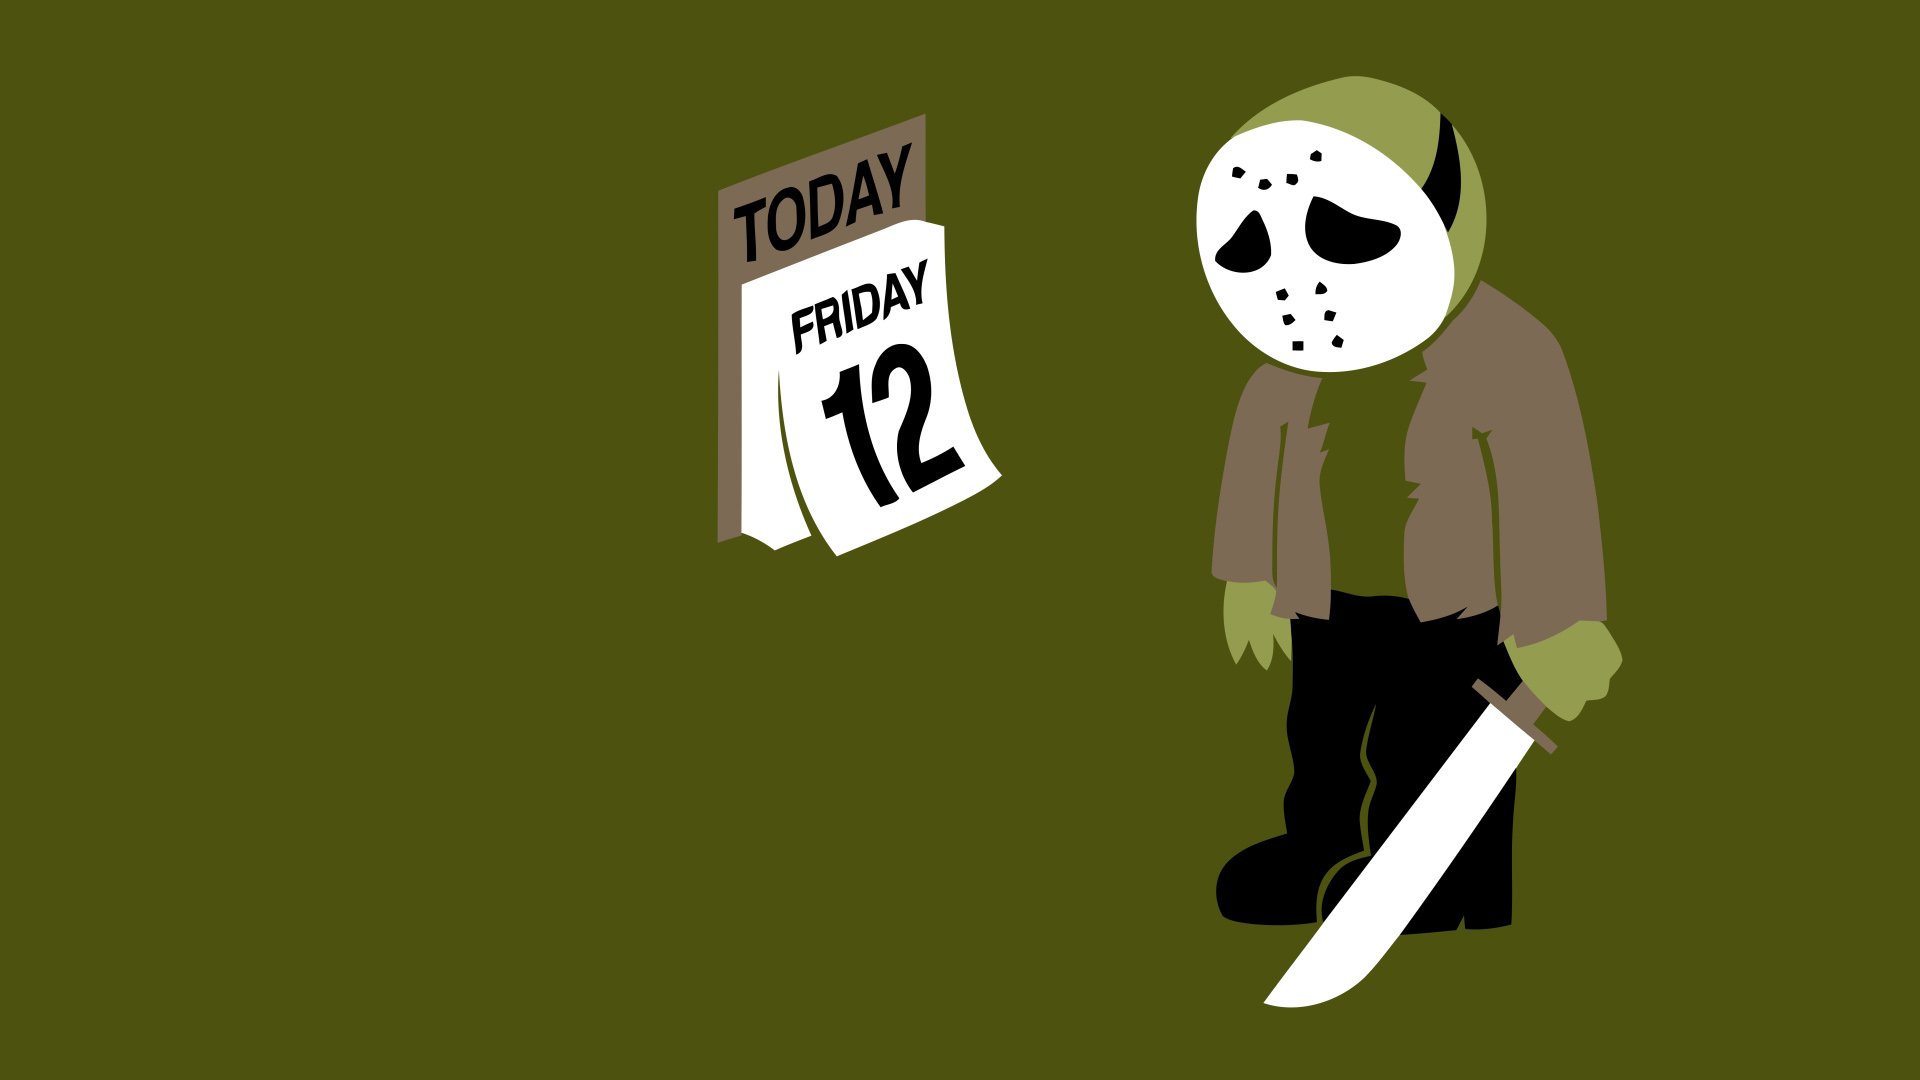 Friday 13 Funny Mask Jason Voorhees Friday The 13th 1920x1080